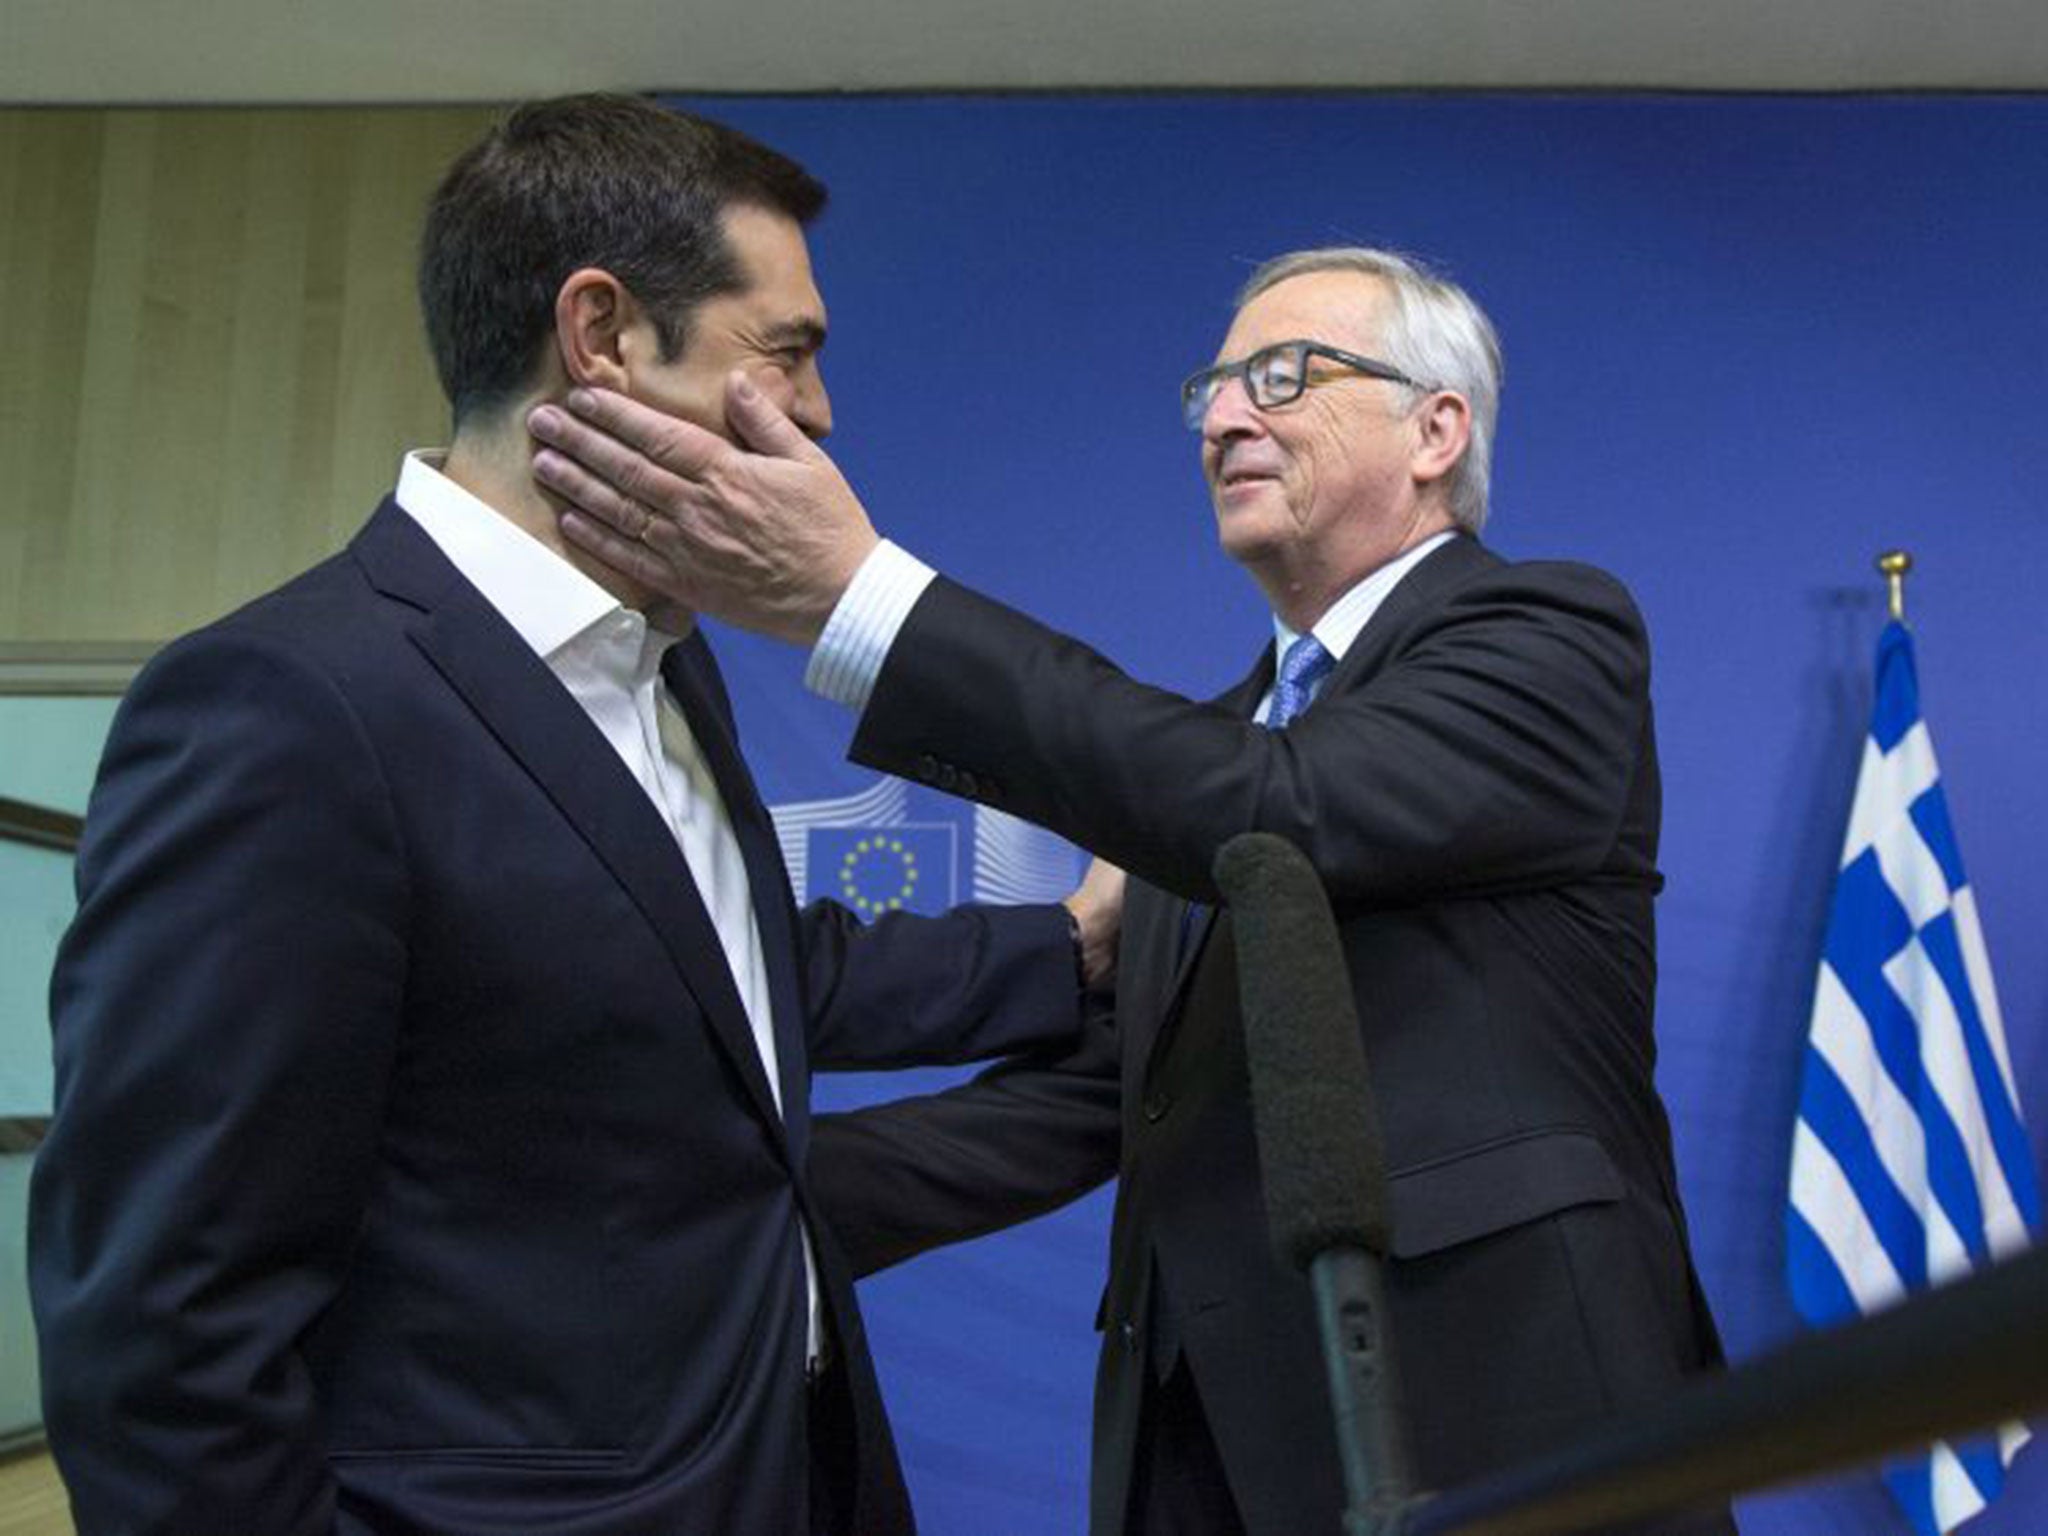 Greek Prime Minister Alexis Tsipras is welcomed by European Commission President Jean-Claude Juncker for a meeting ahead of a Eurozone emergency summit on Greece in Brussels, Belgium June 22, 2015.